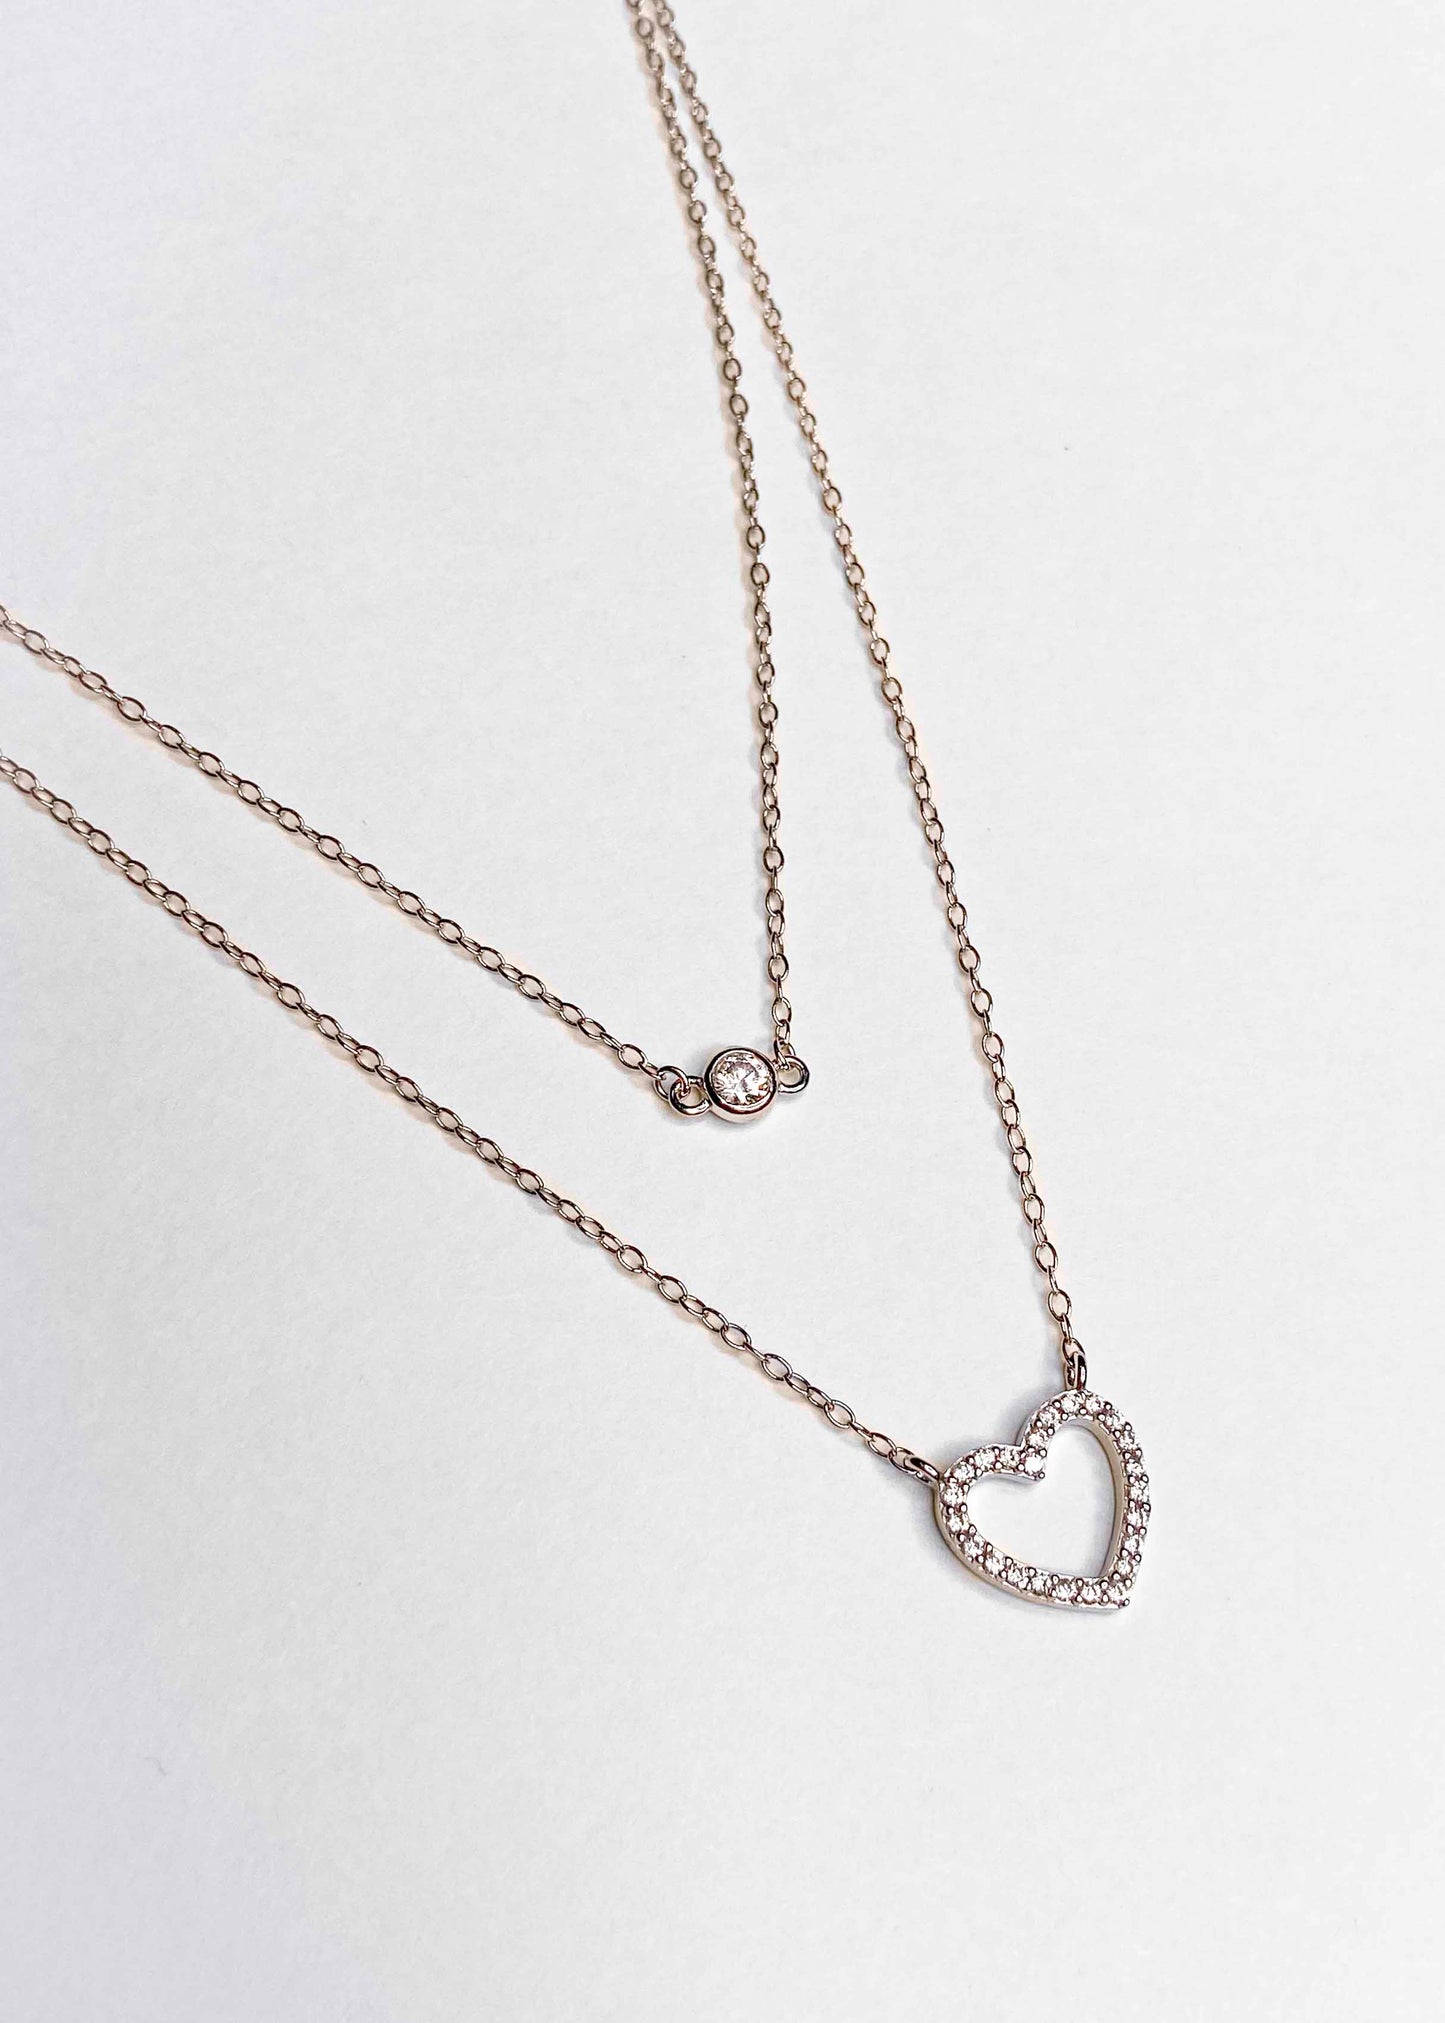 925 sterling silver double-layer necklace delicate clavicle chain zircon necklace.